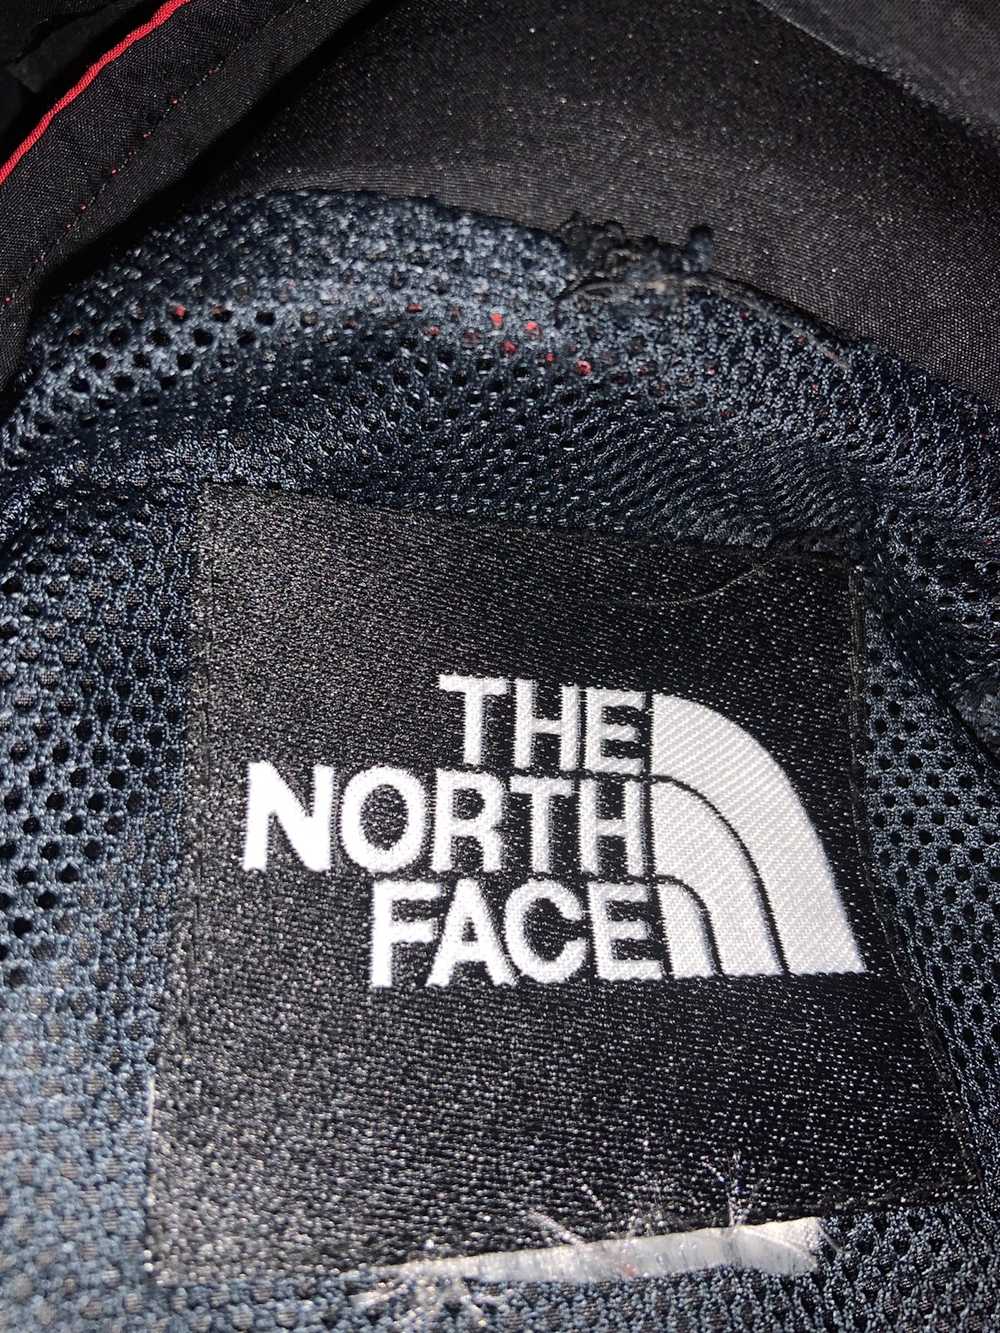 The North Face Retro North Face Jacket - image 4